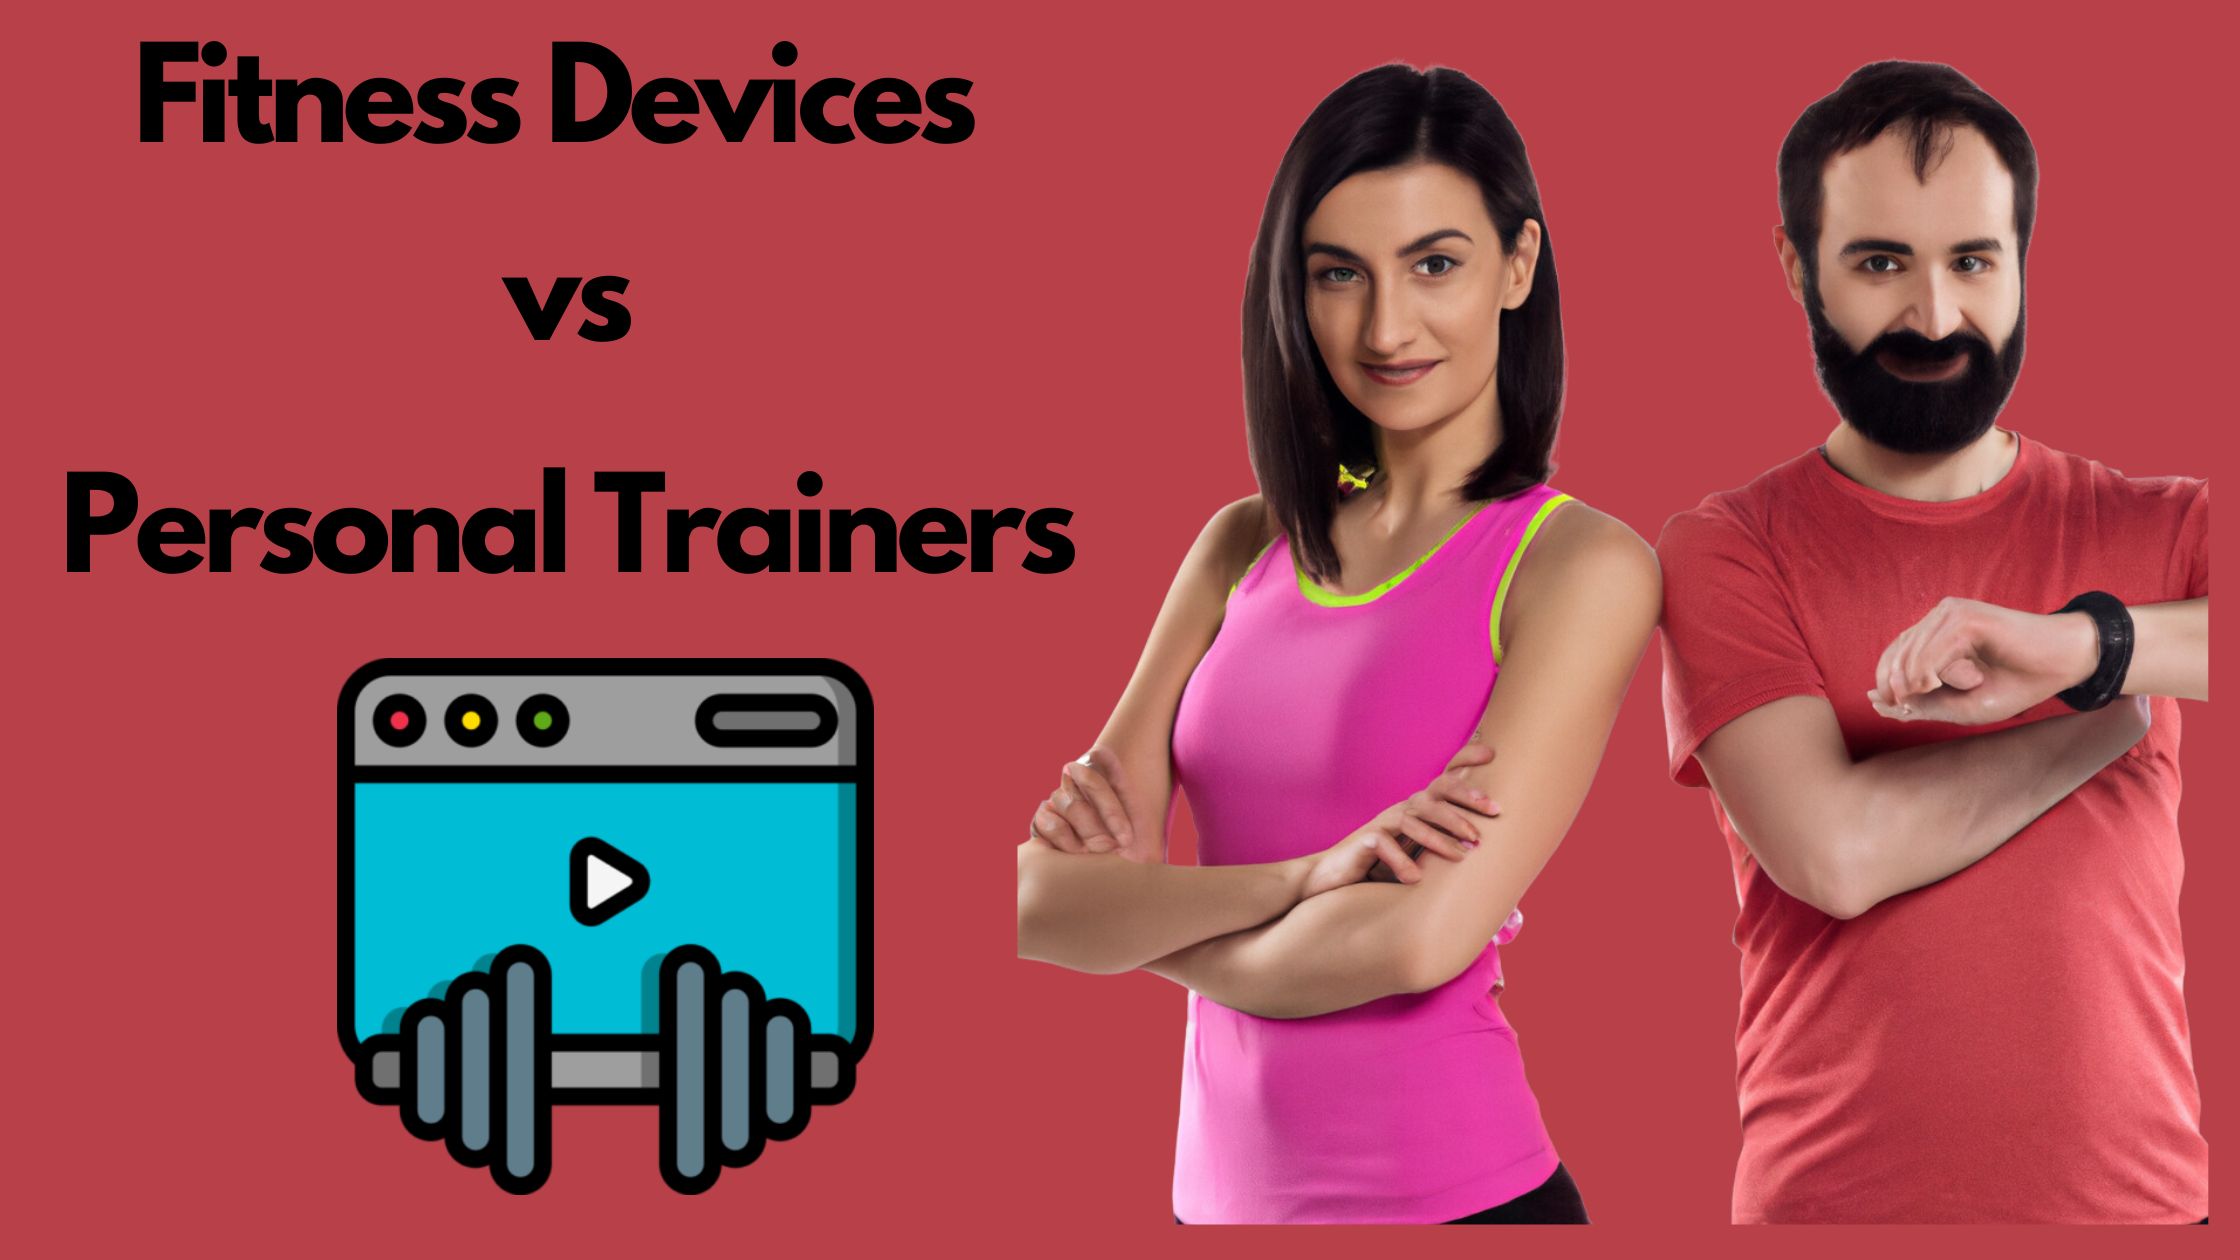 Fitness Devices vs Personal Trainers